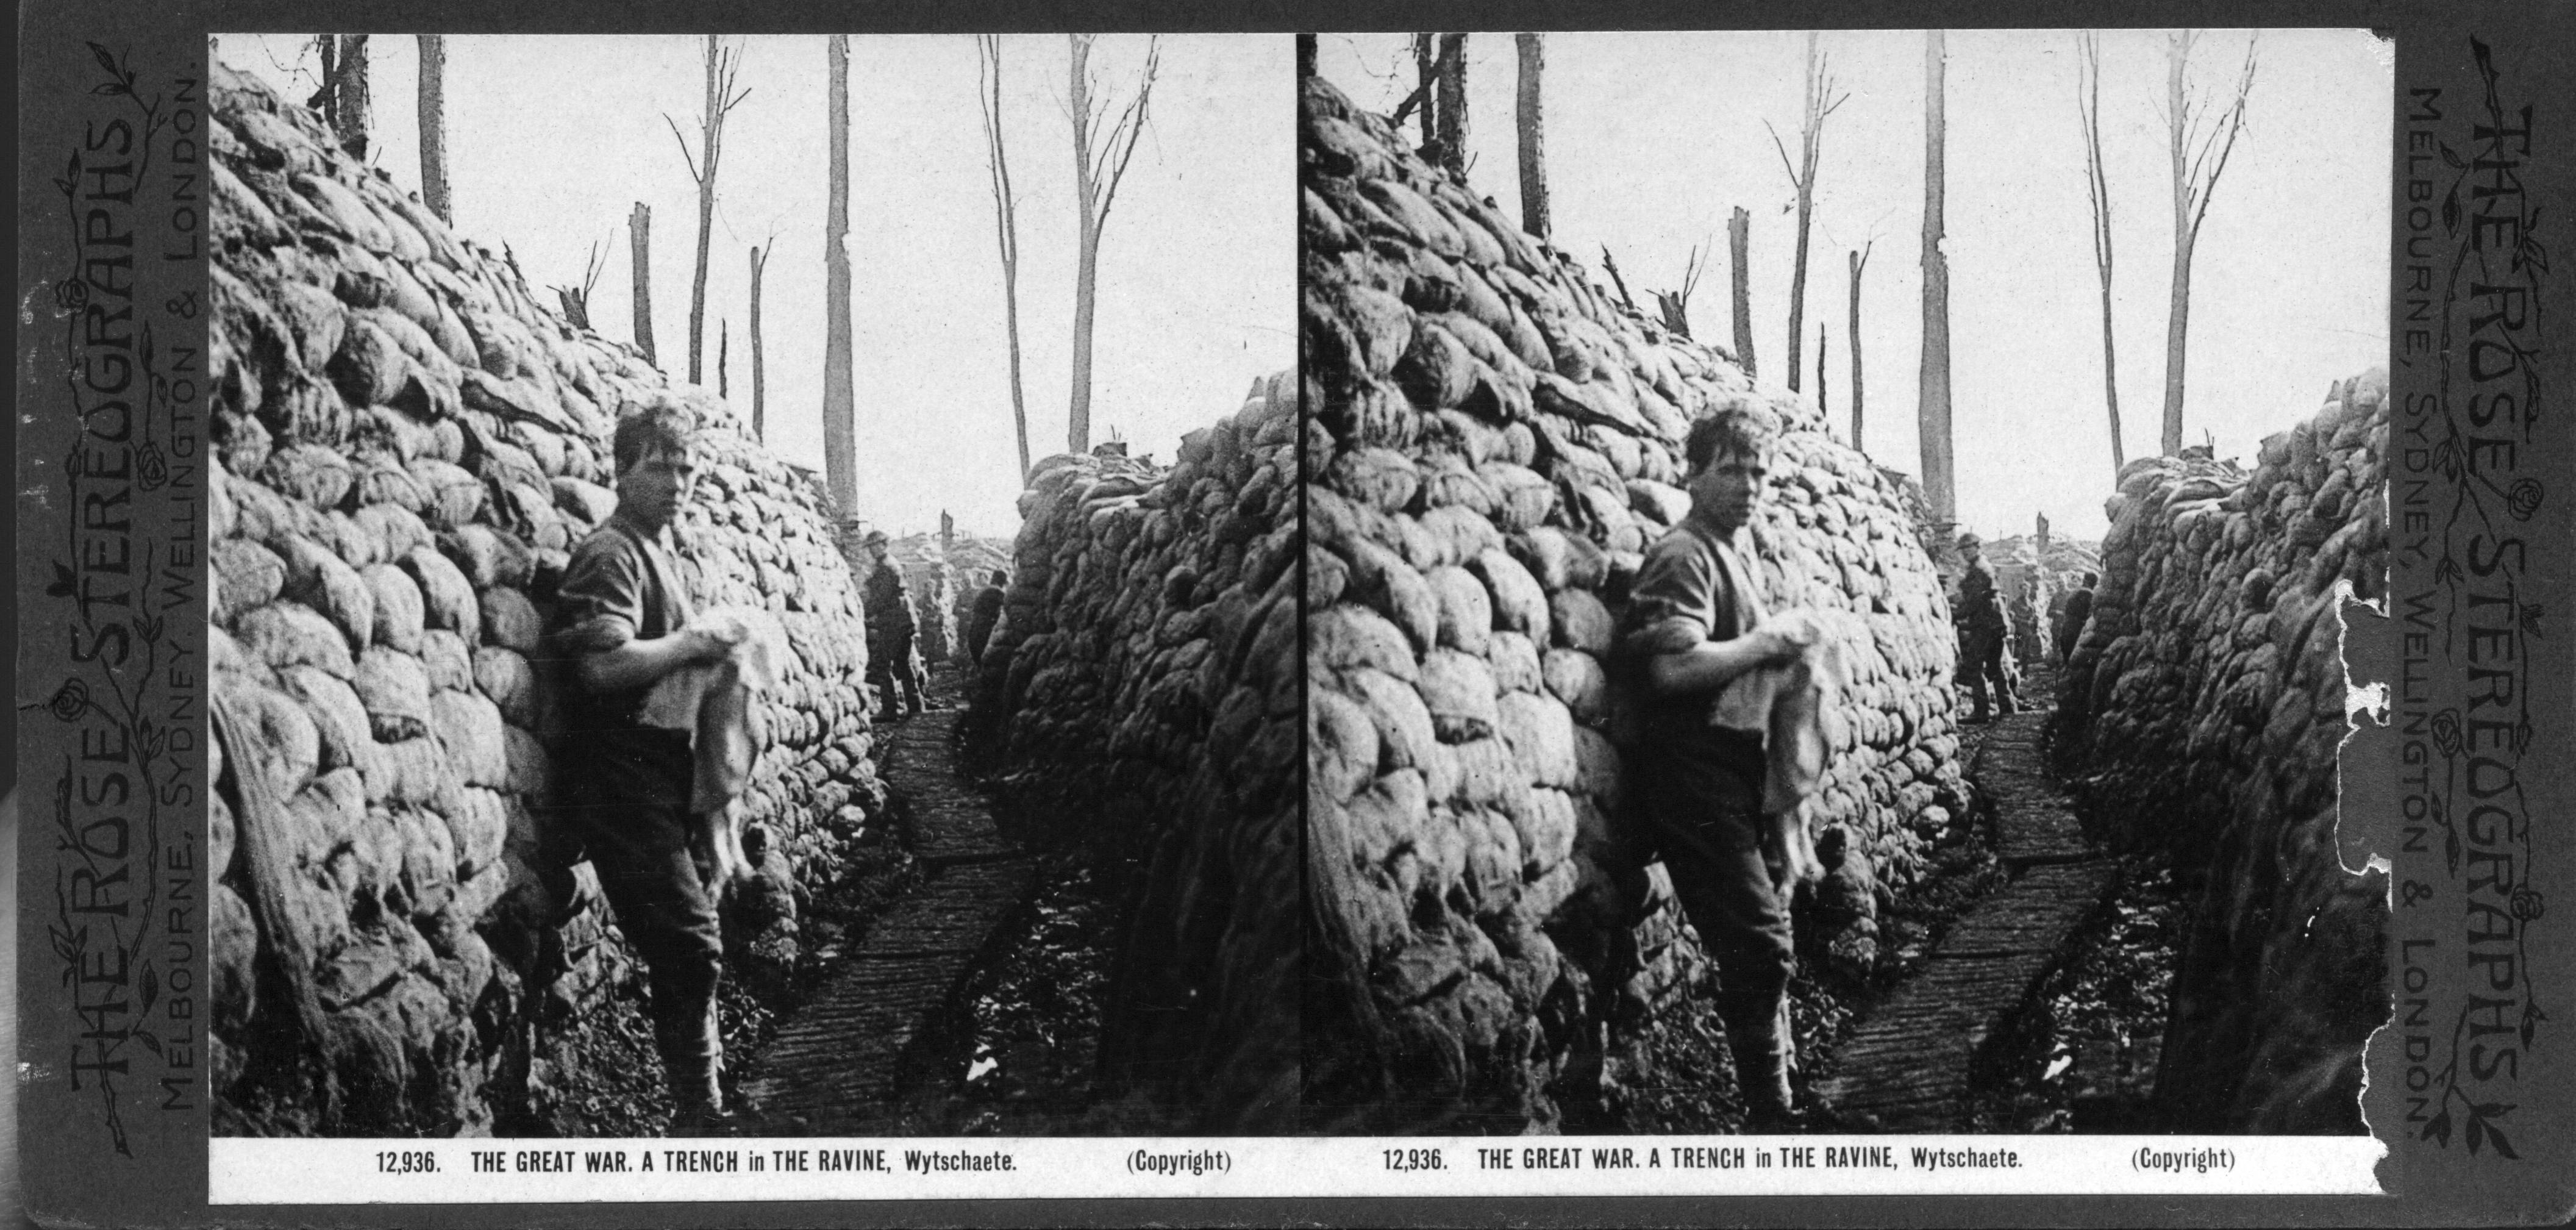 THE GREAT WAR. A TRENCH in THE RAVINE, Wytschaete.